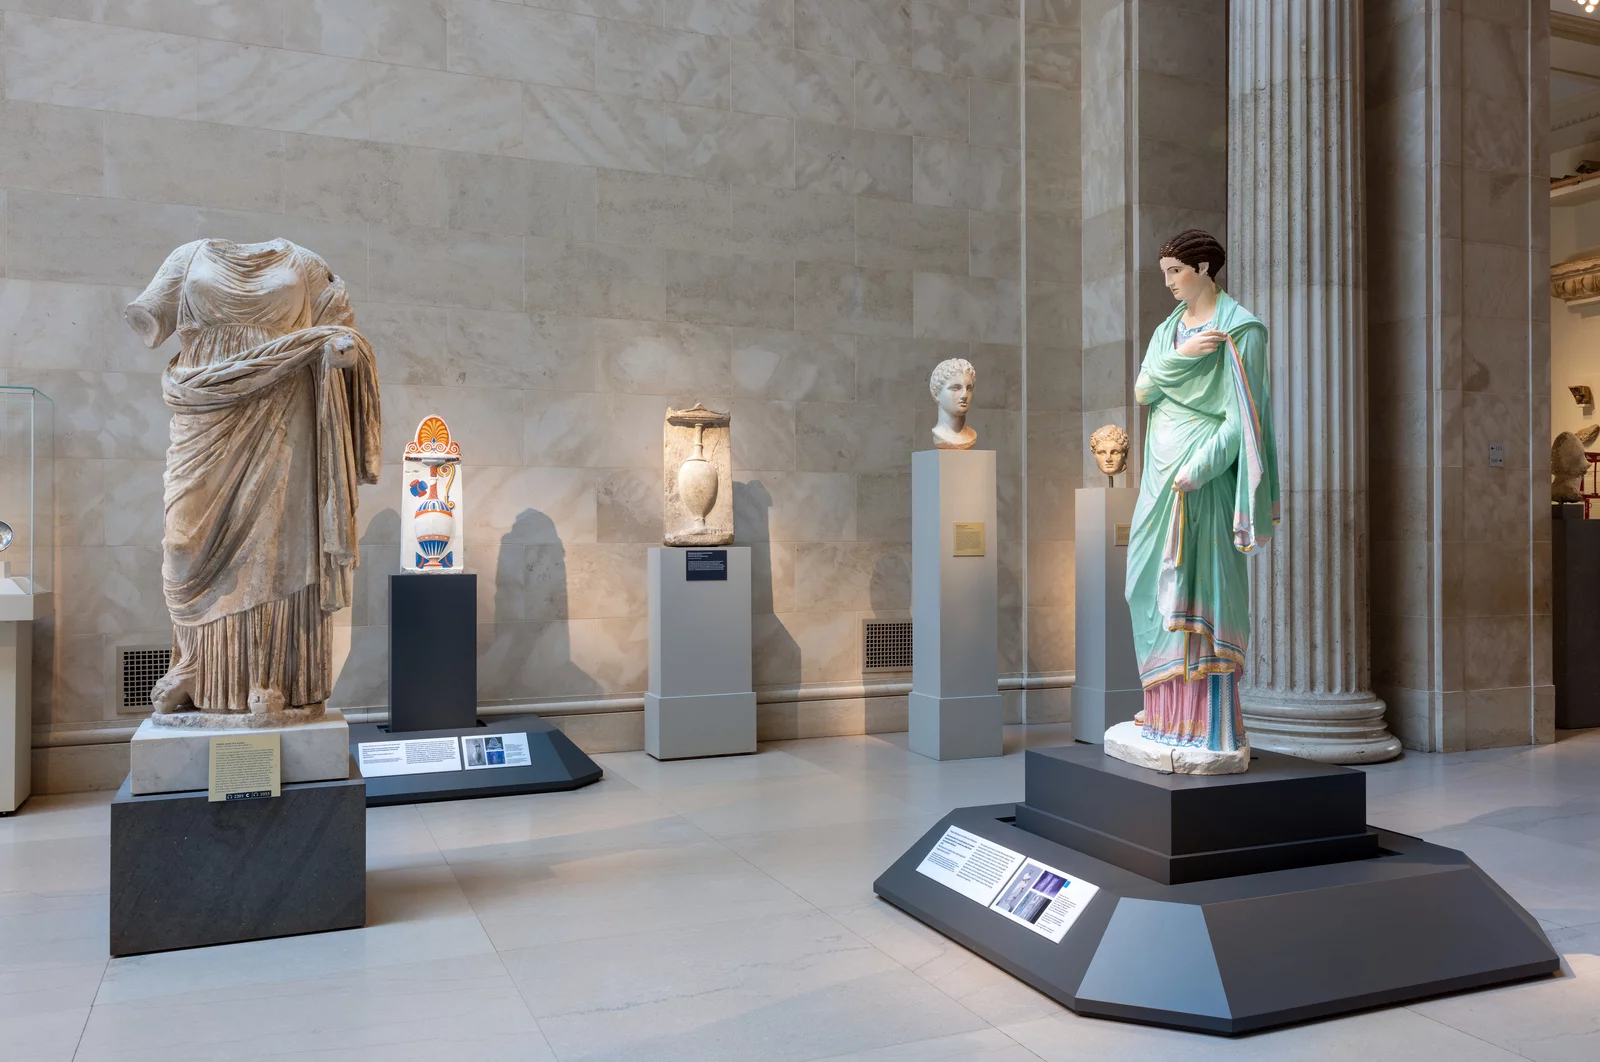 “The Greek Miracle”: Classical sculpture at the met